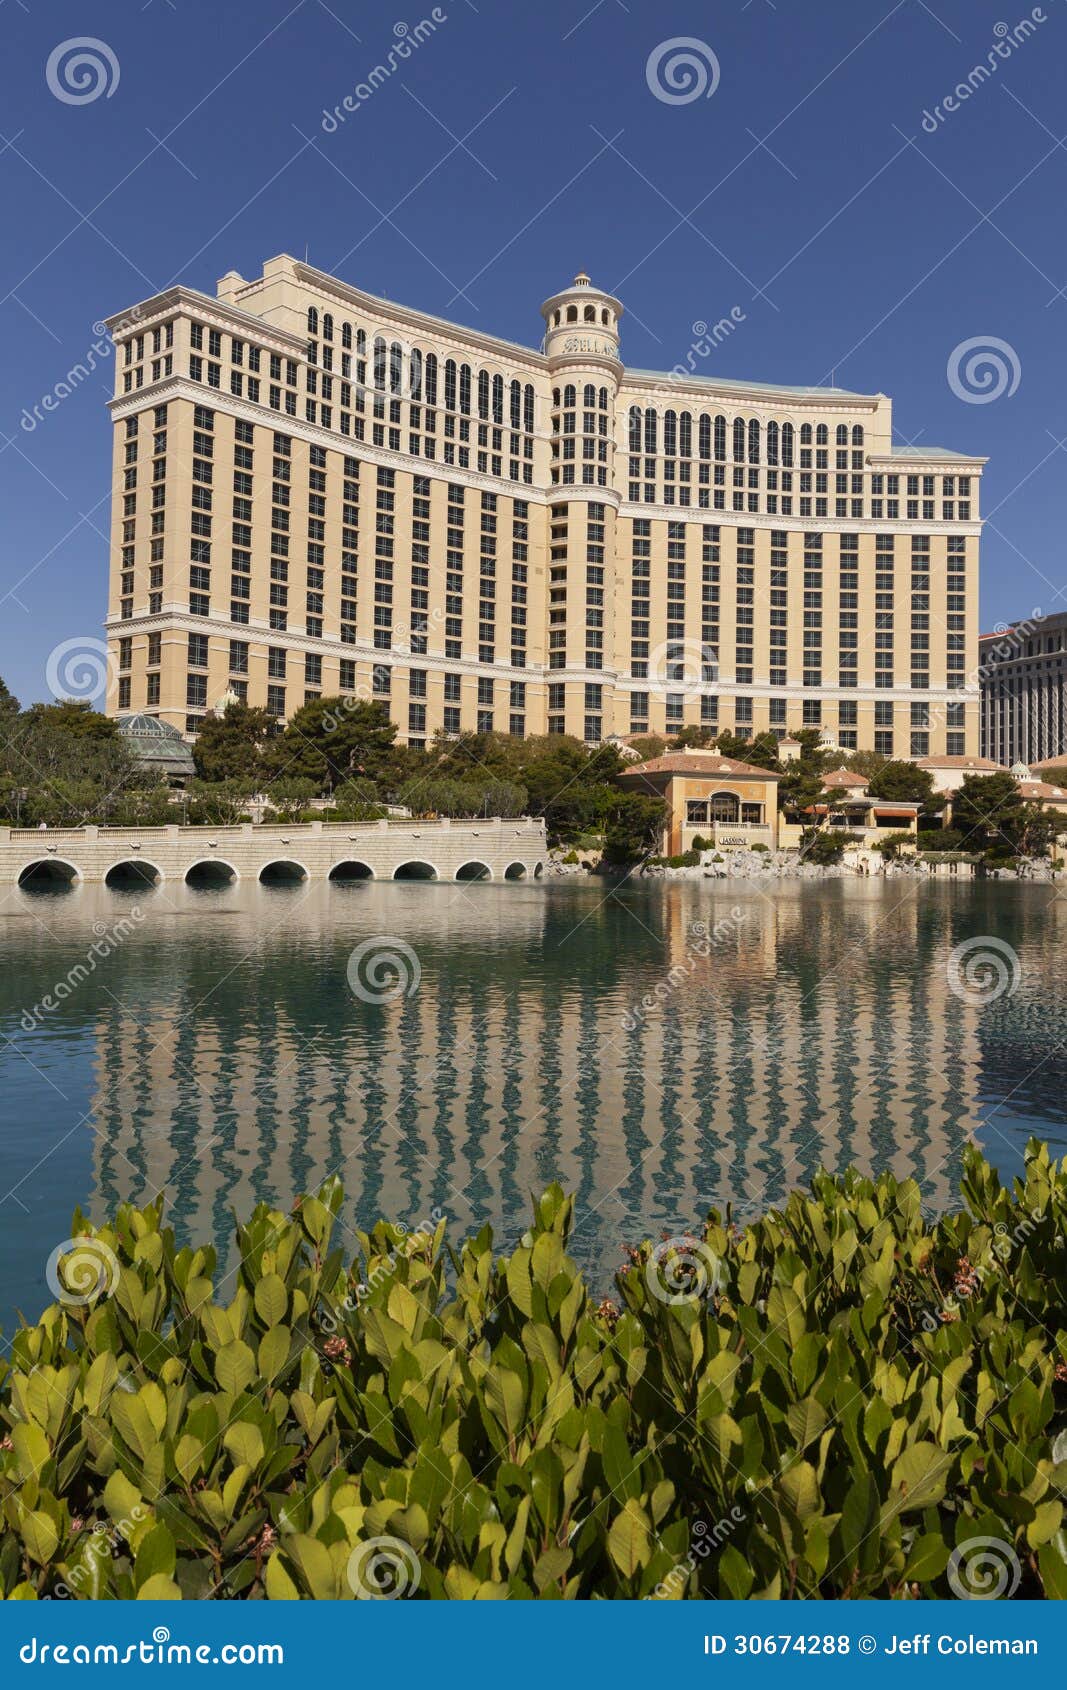 The Bellagio Hotel, Early Morning in Las Vegas, NV on April 27